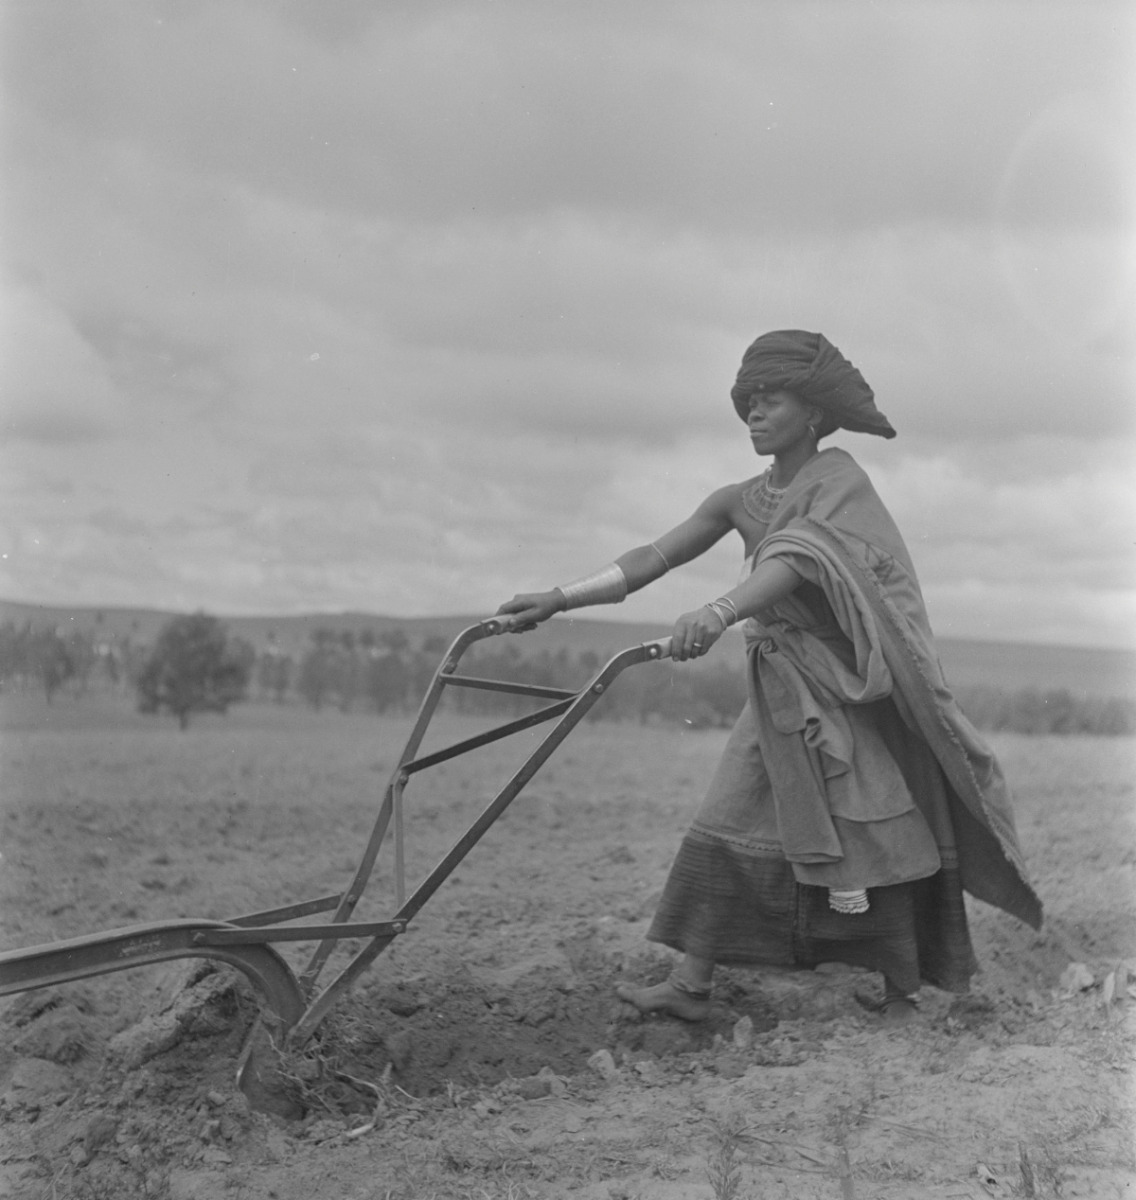 Woman ploughing, Transkei, 1947. Woman working in the fields while men work in the mines. Photo by Constance Stuart Larrabee